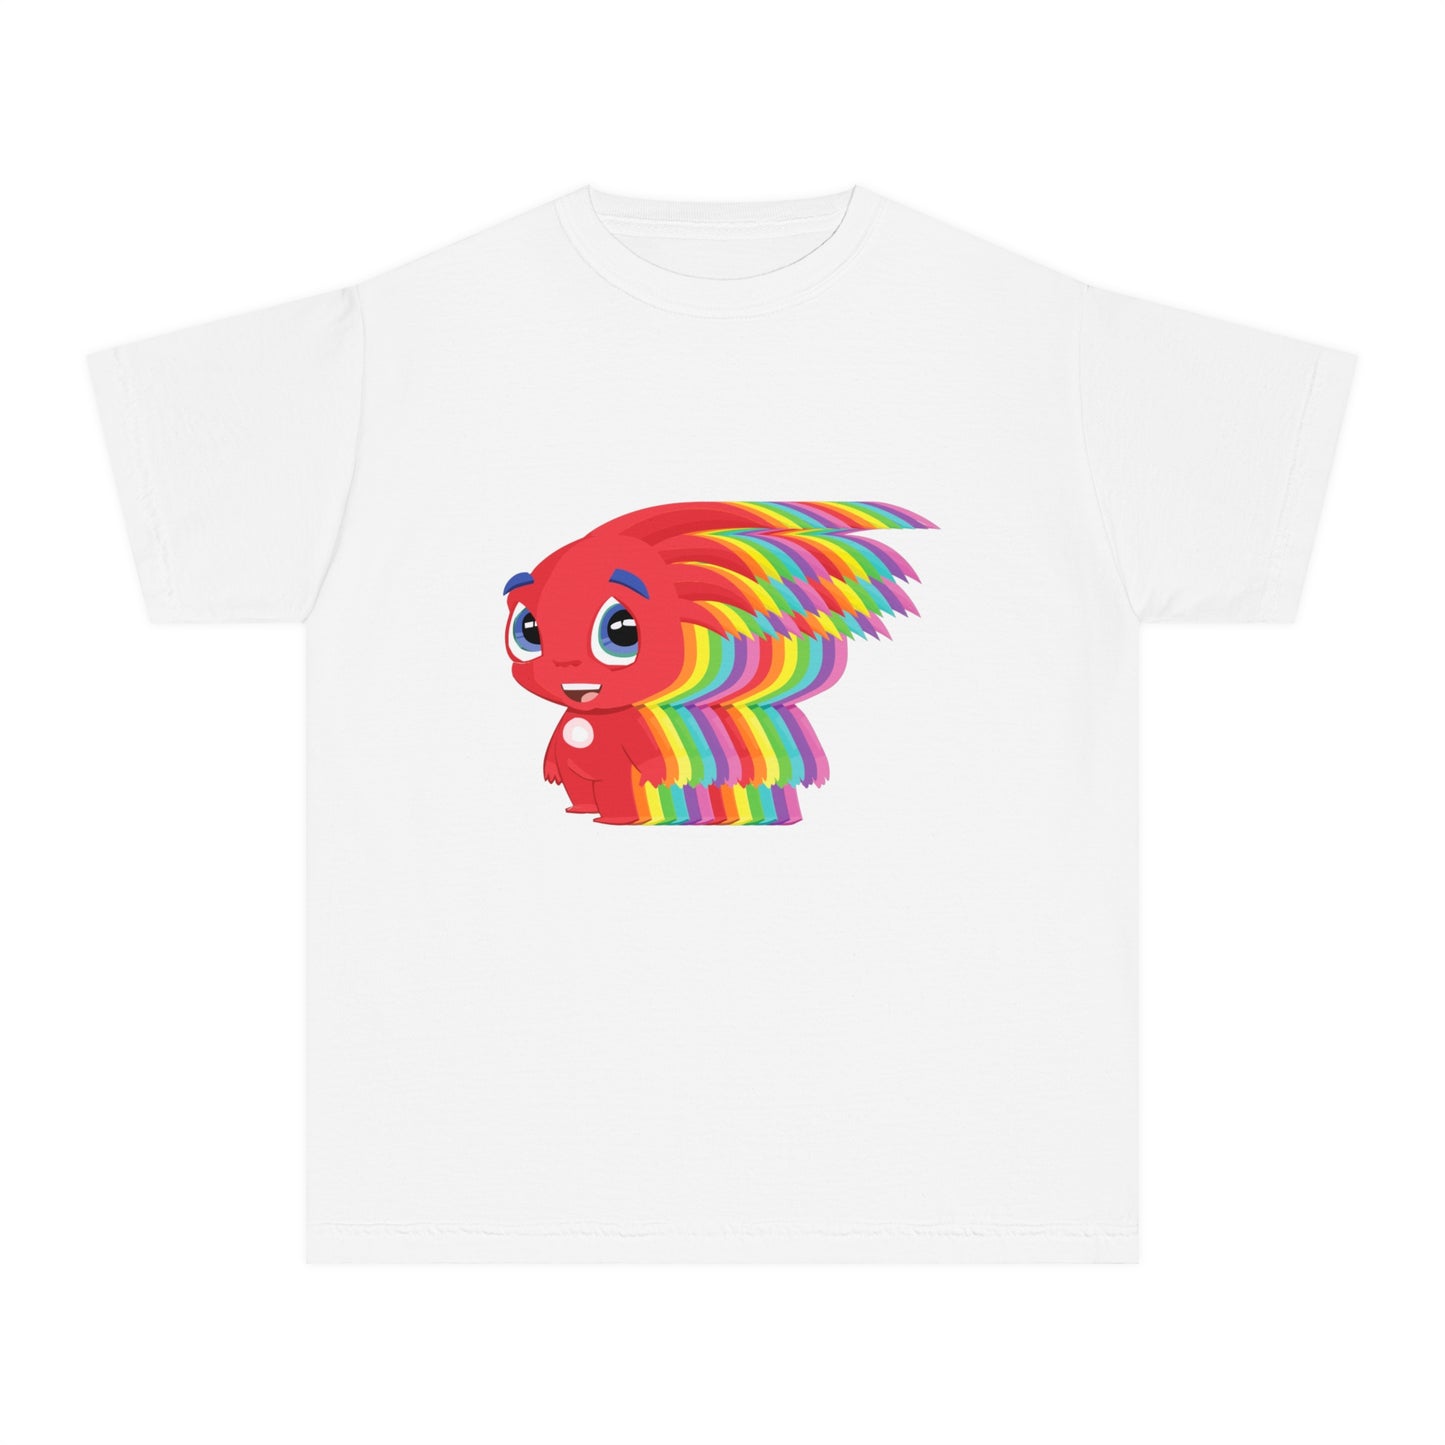 Gliddle Comfort Colors Youth Tee